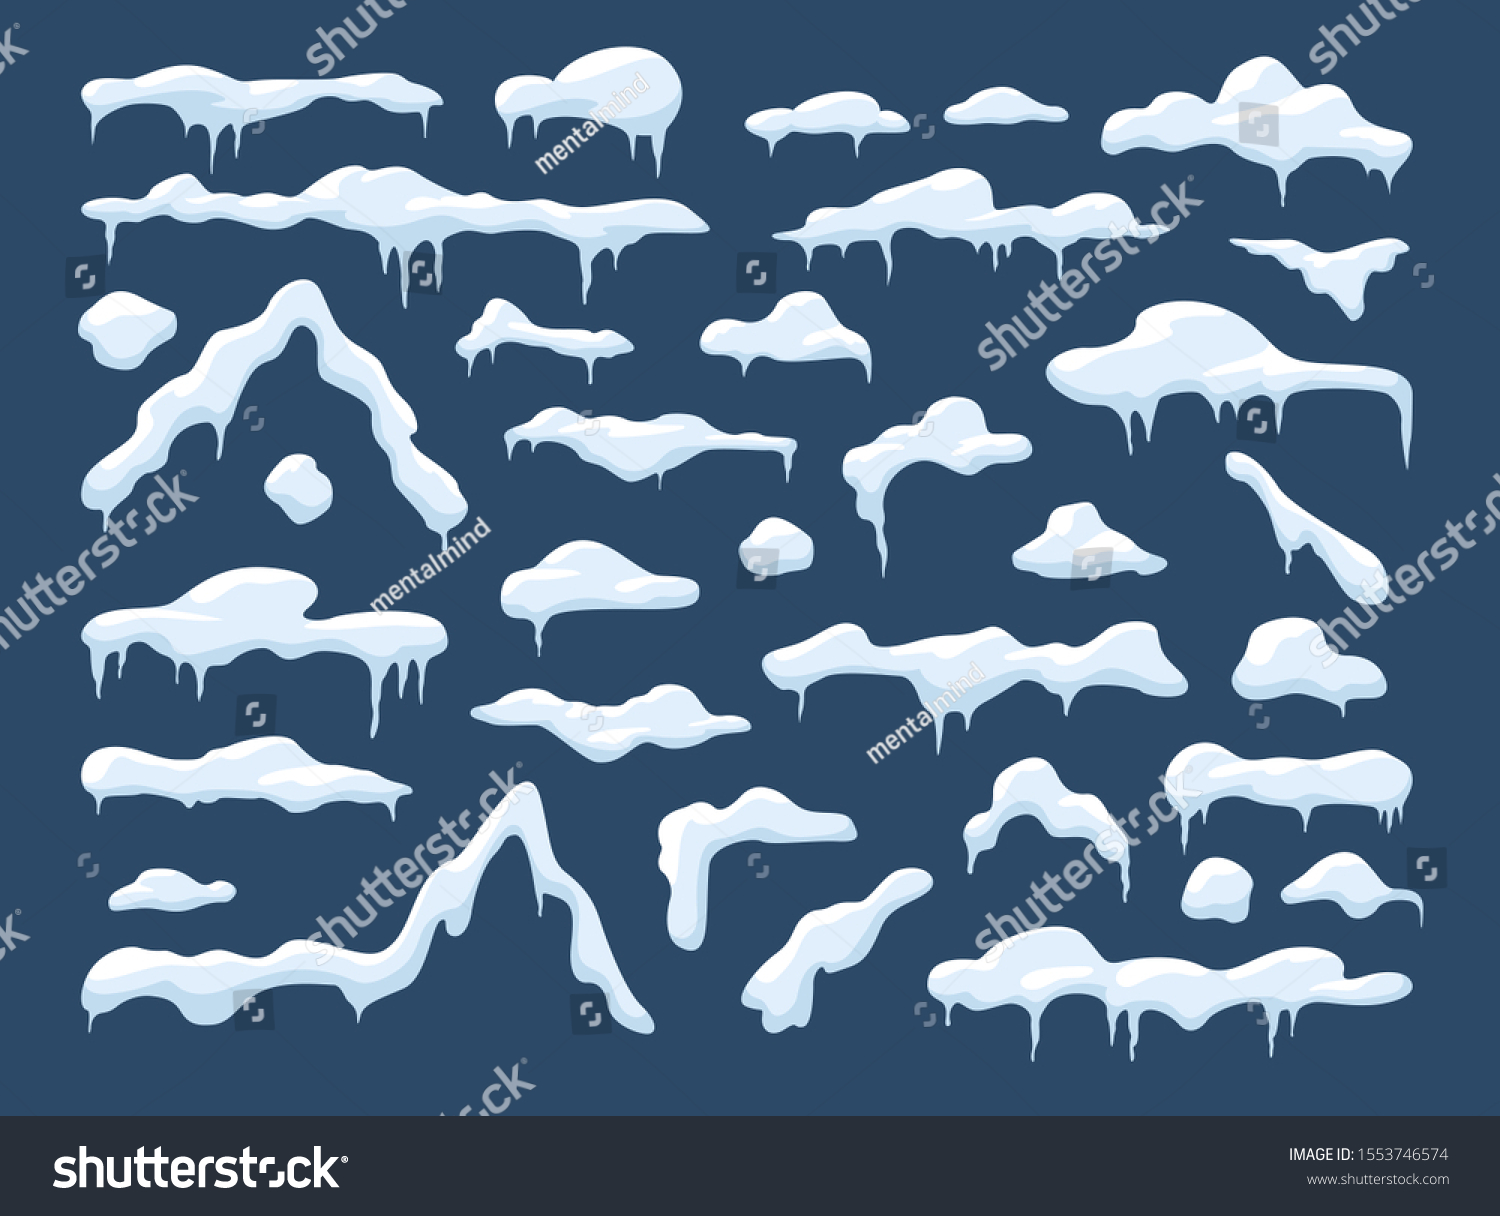 Winter decoration set with snow caps with trailing icicles and snowballs in a large assortment of shapes and sizes on a blue background for use as design elements, vector illustration #1553746574